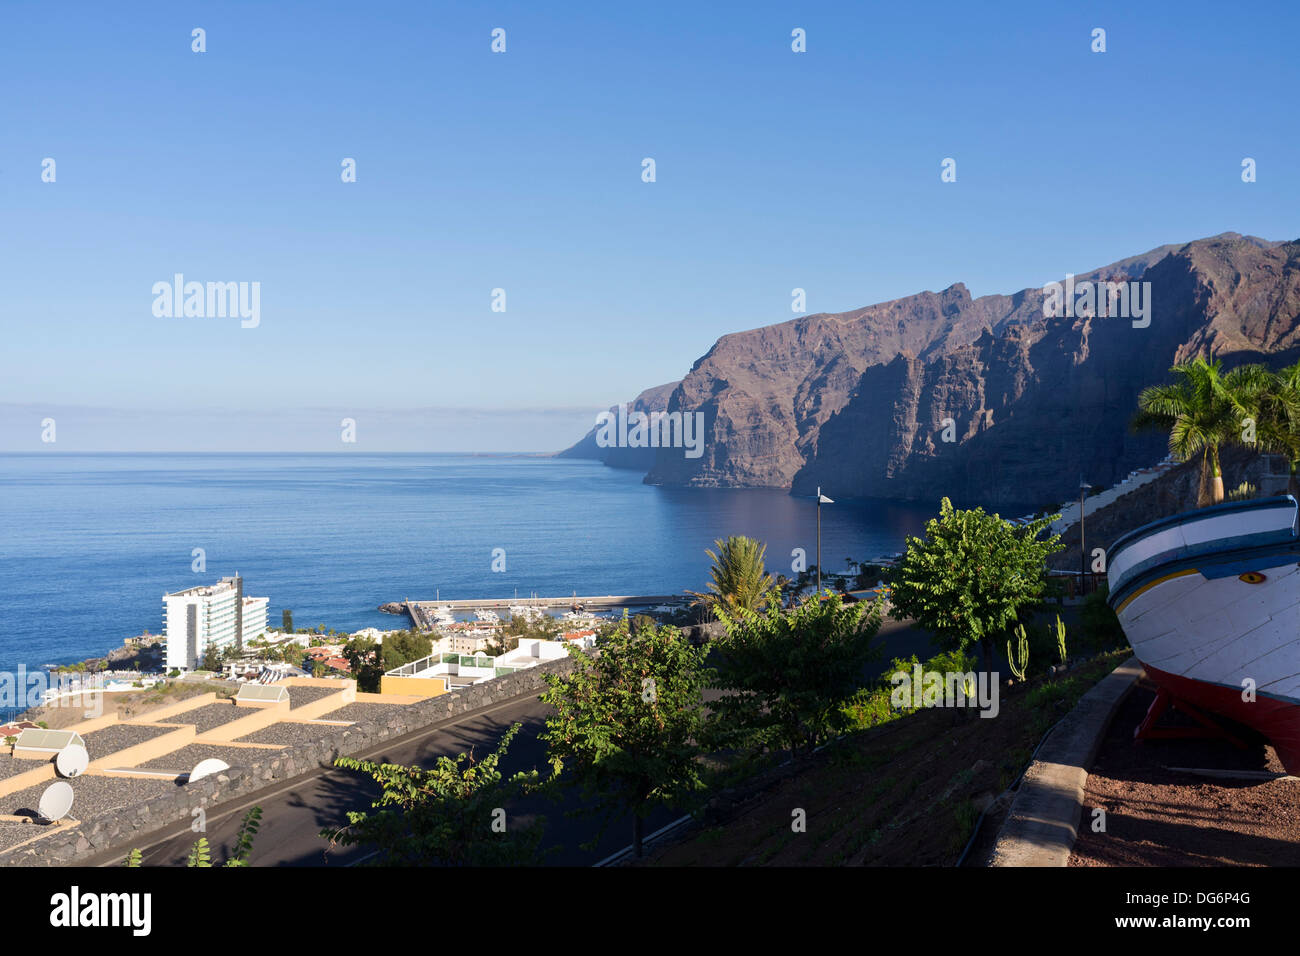 View to the Los Gigantes cliffs from the viewpoint, Mirador de Archienque, Tenerife, Canary Islands, Spain Stock Photo